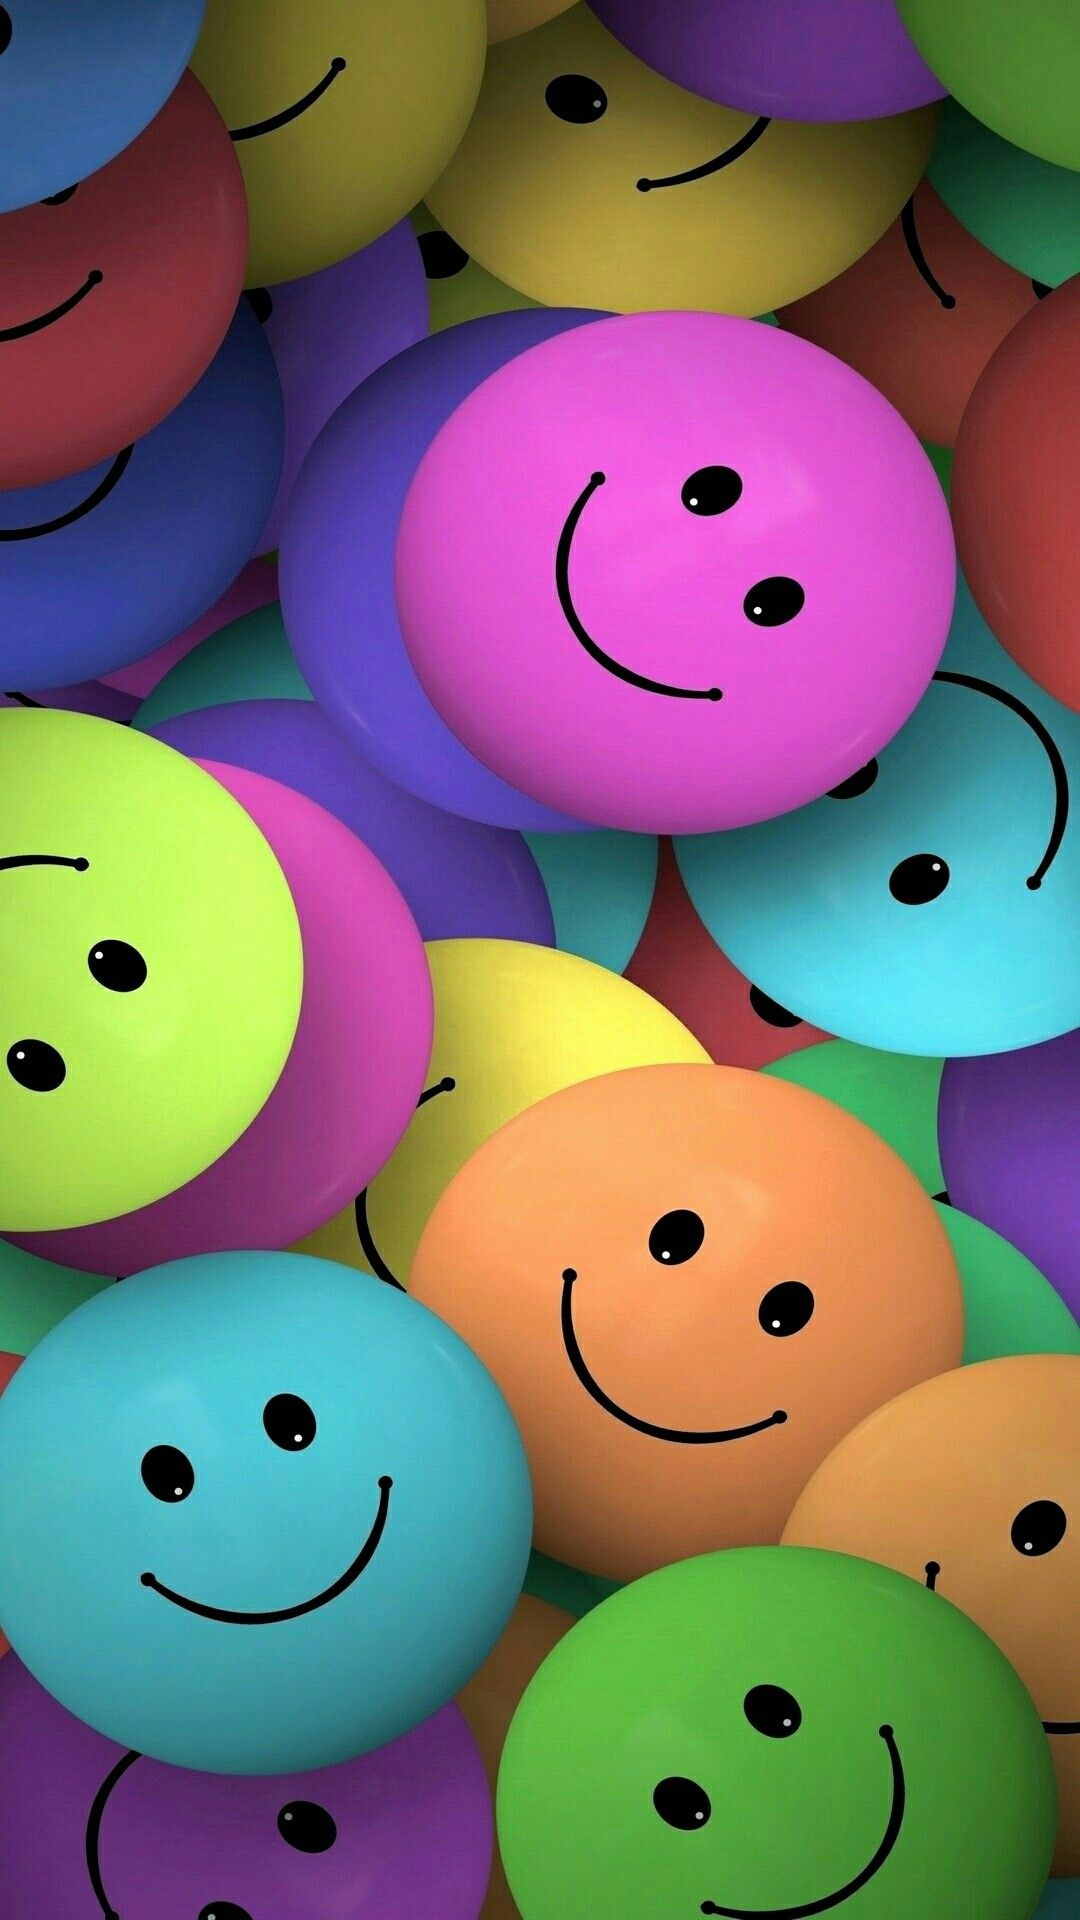 Smile wallpaper by Abdul7ghani  Download on ZEDGE  b7b4